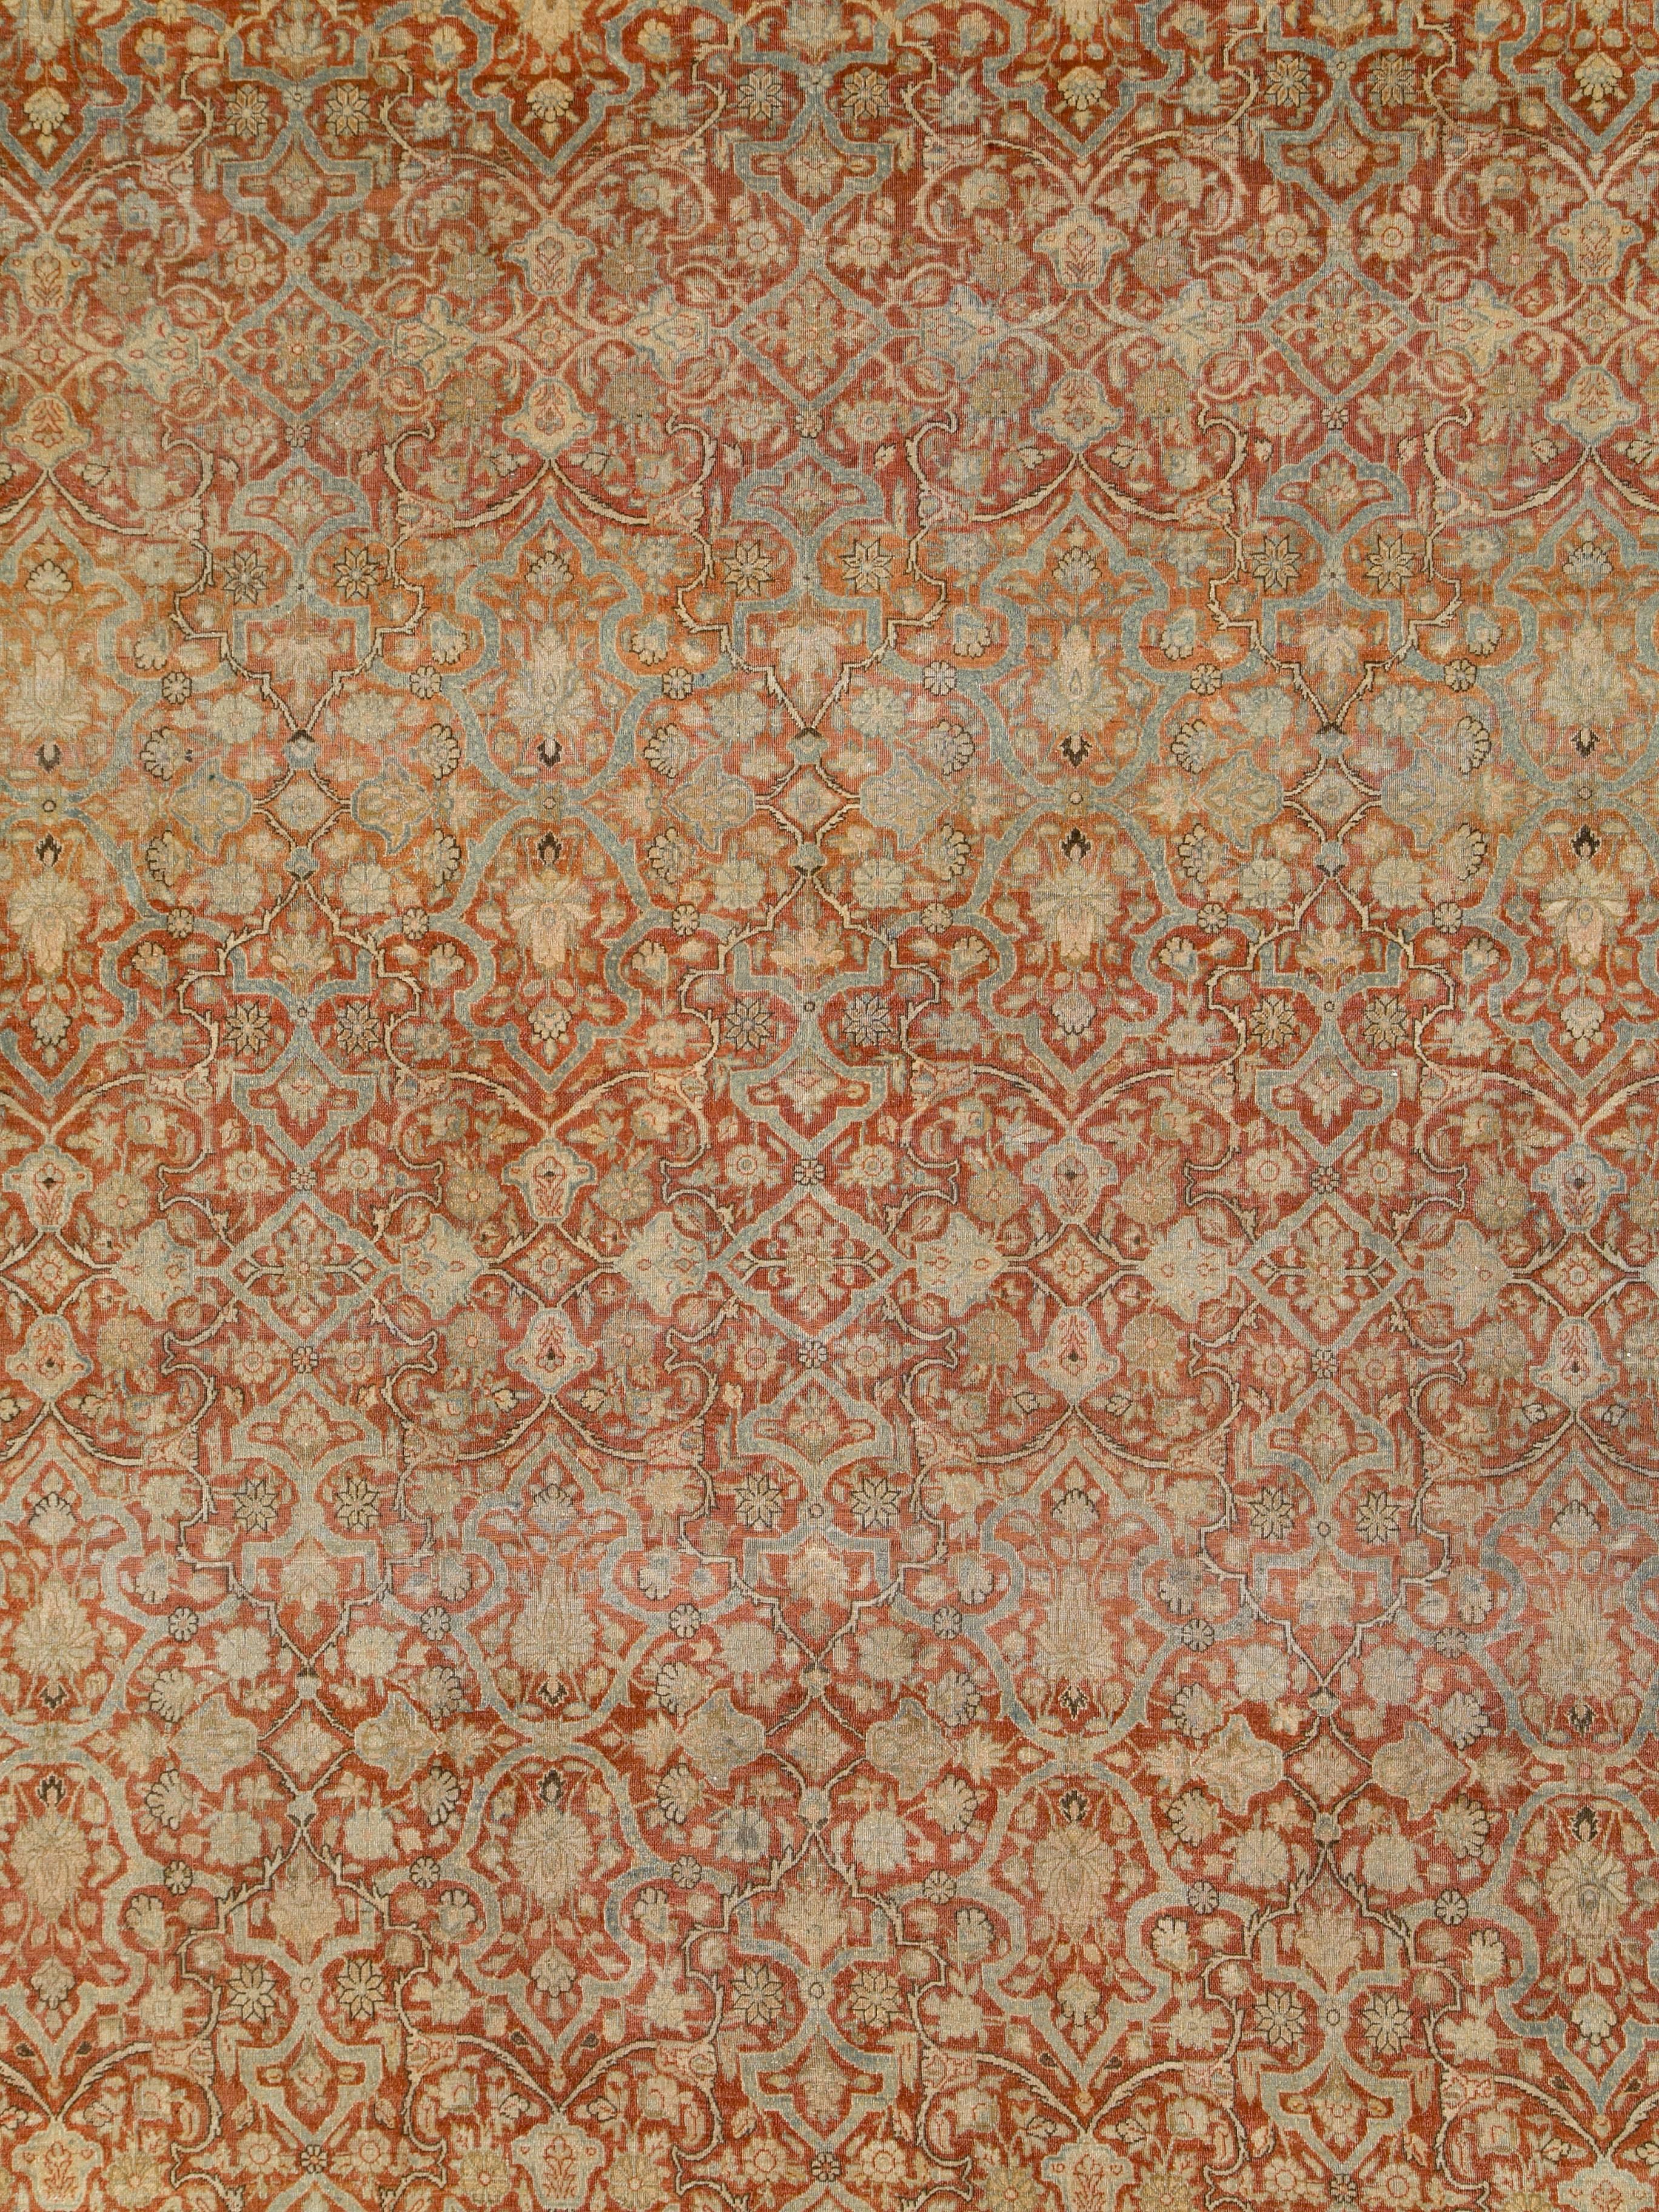 An antique washed Persian Kashan carpet from the first quarter of the 20th century.